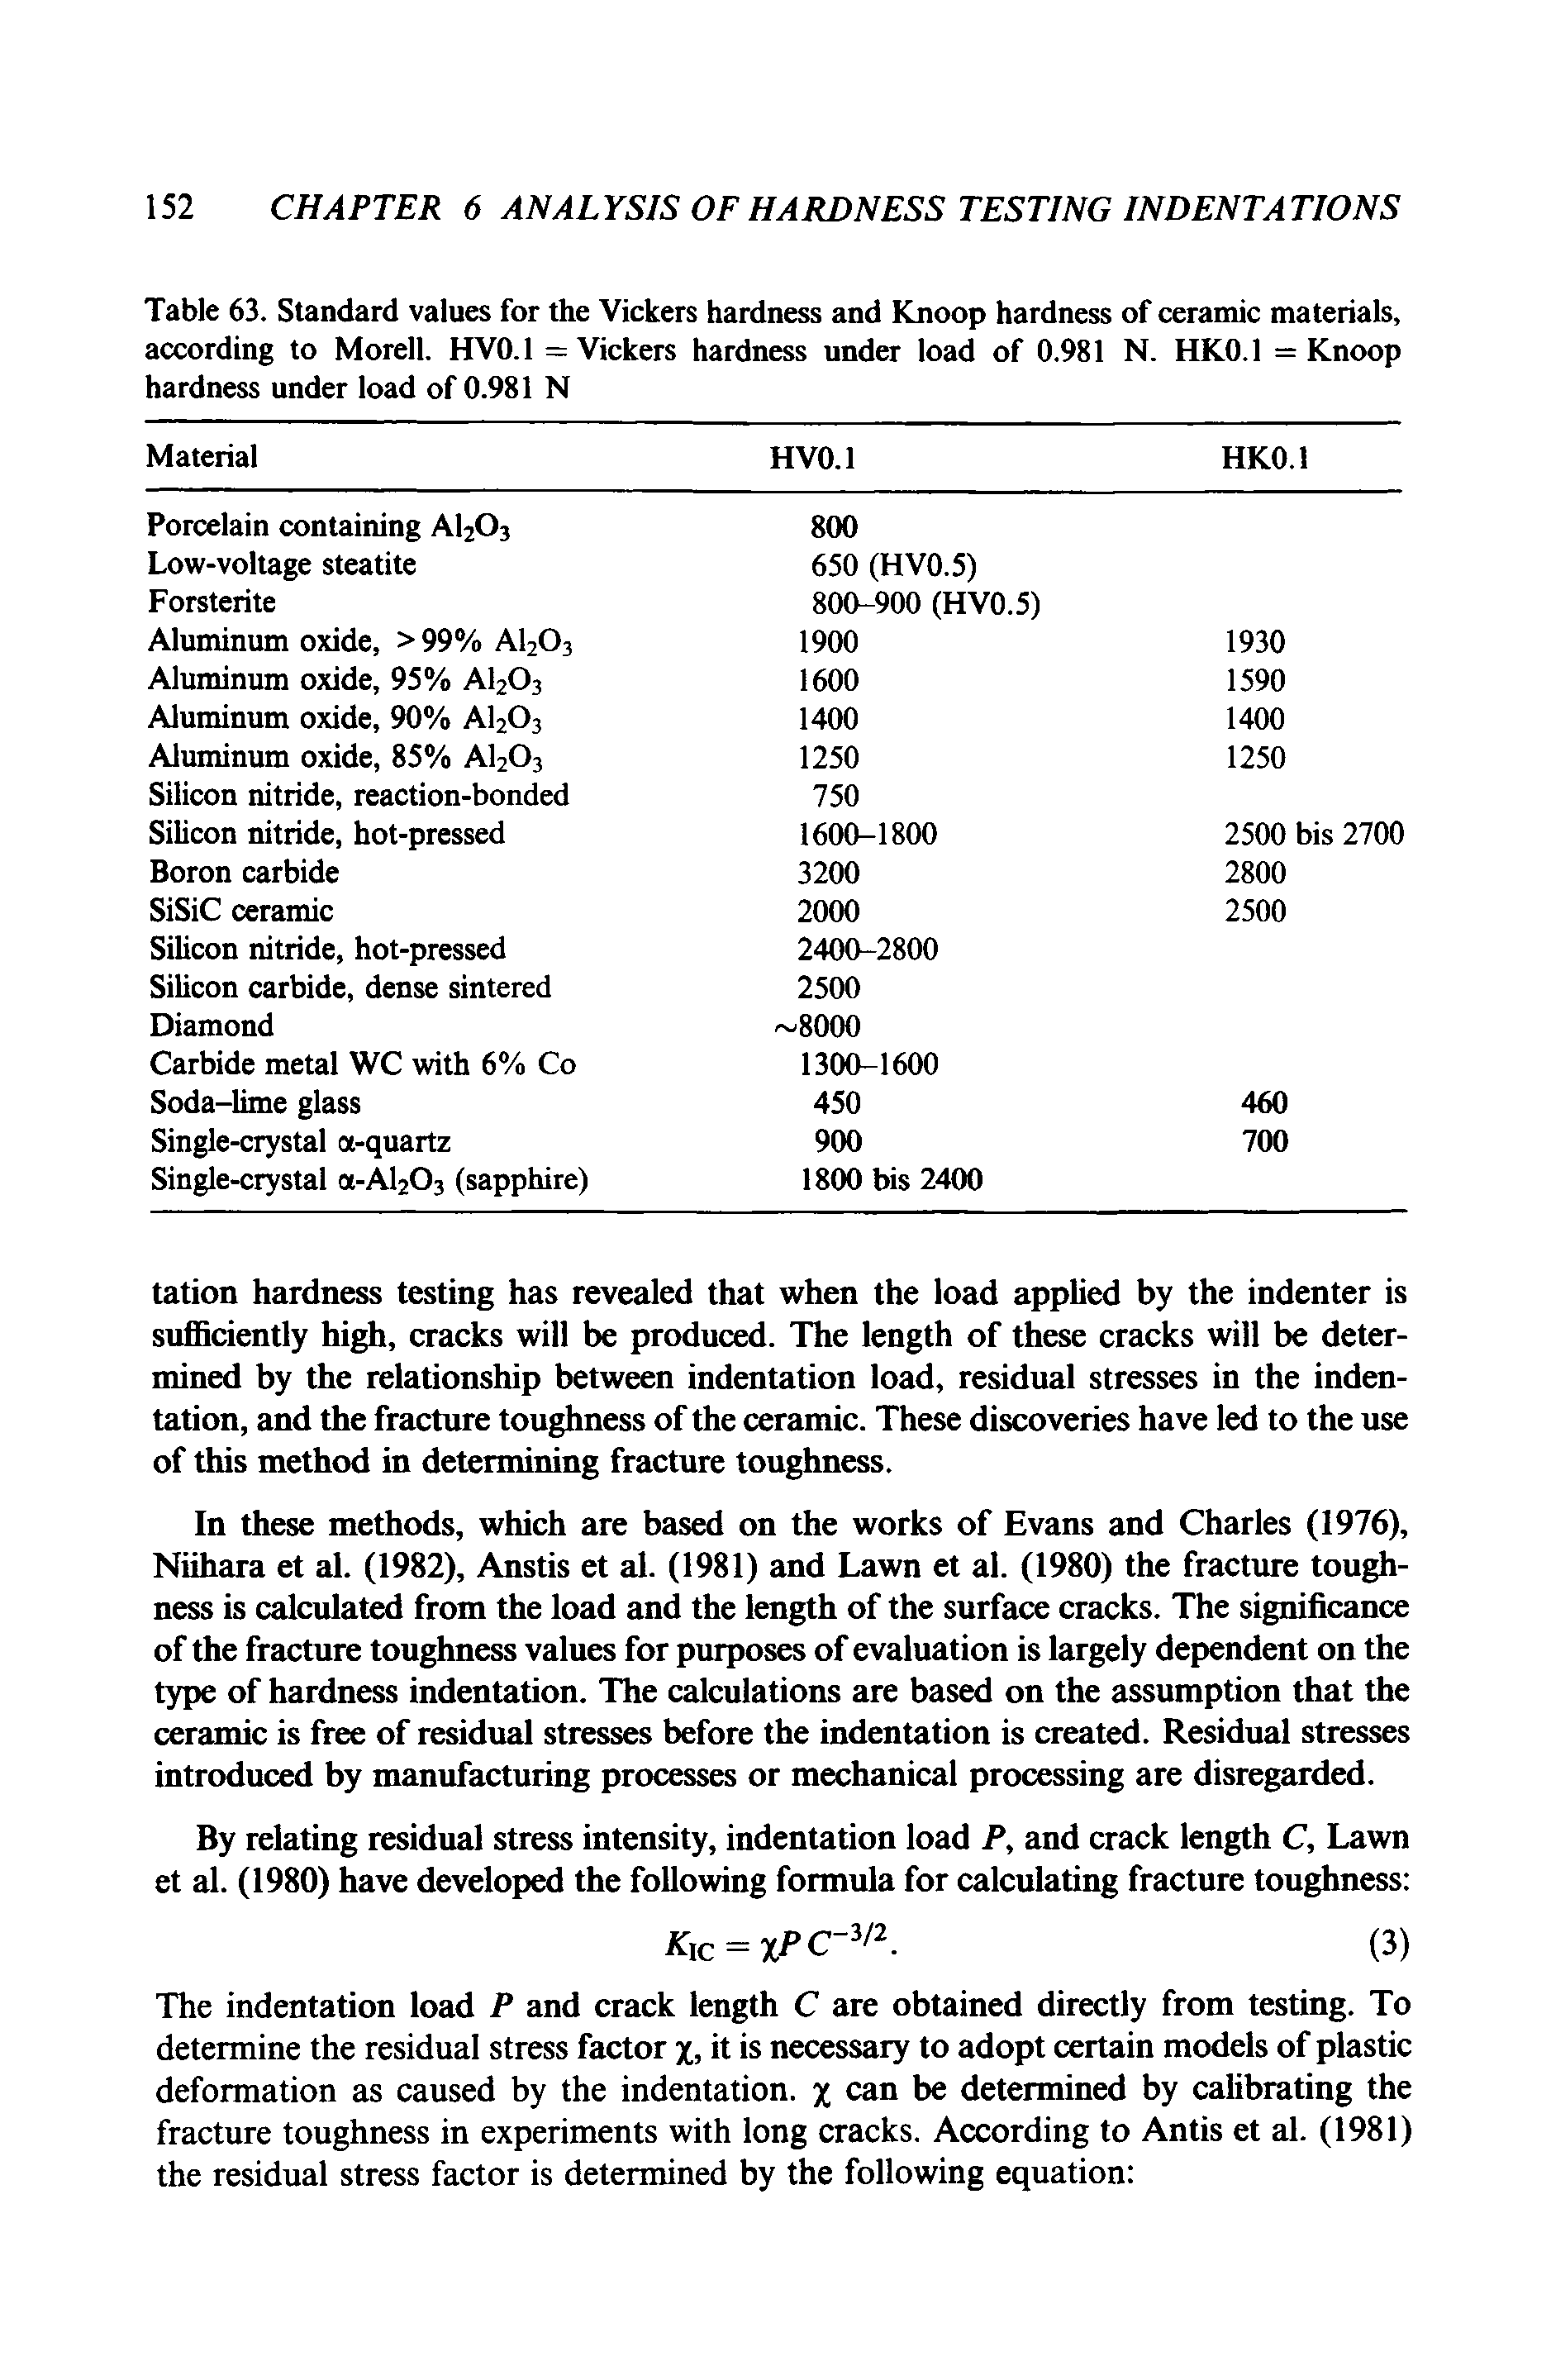 Table 63. Standard values for the Vickers hardness and Knoop hardness of ceramic materials, according to Morell. HVO.l = Vickers hardness under load of 0.981 N. HKO.l = Knoop hardness under load of 0.981 N...